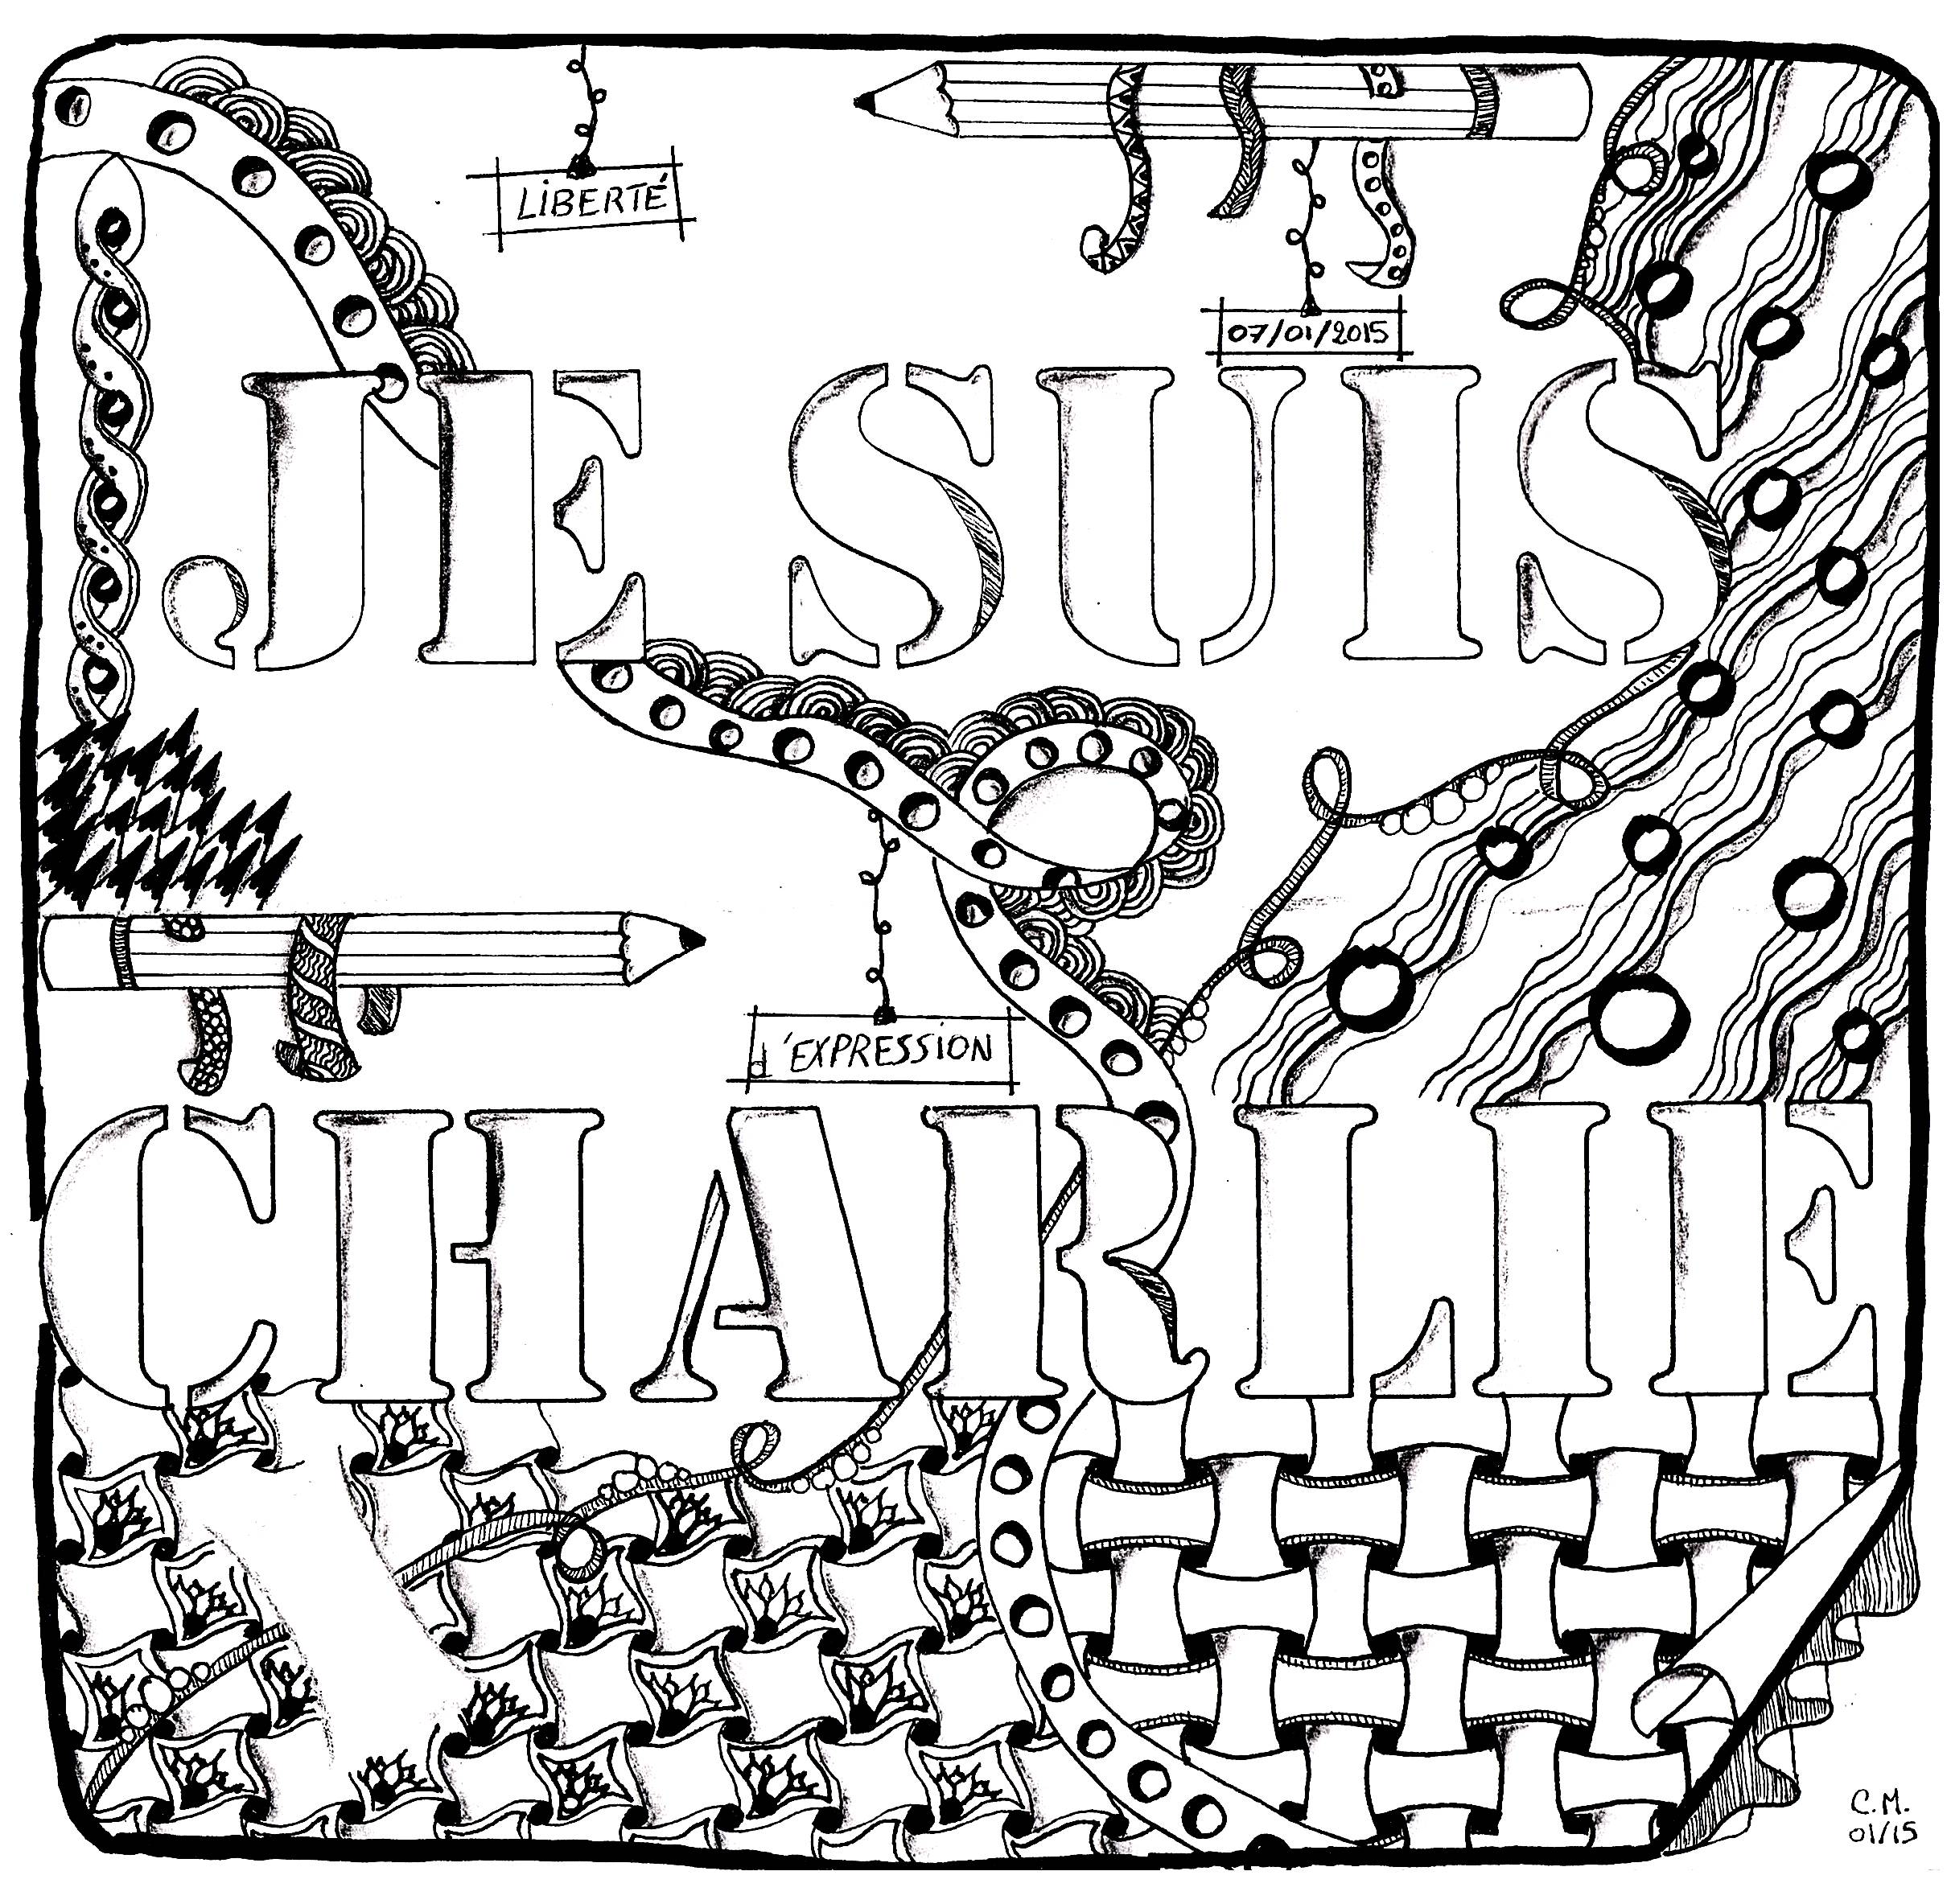 Zentangle coloring page 'Je suis Charlie', to color, by Cathy M